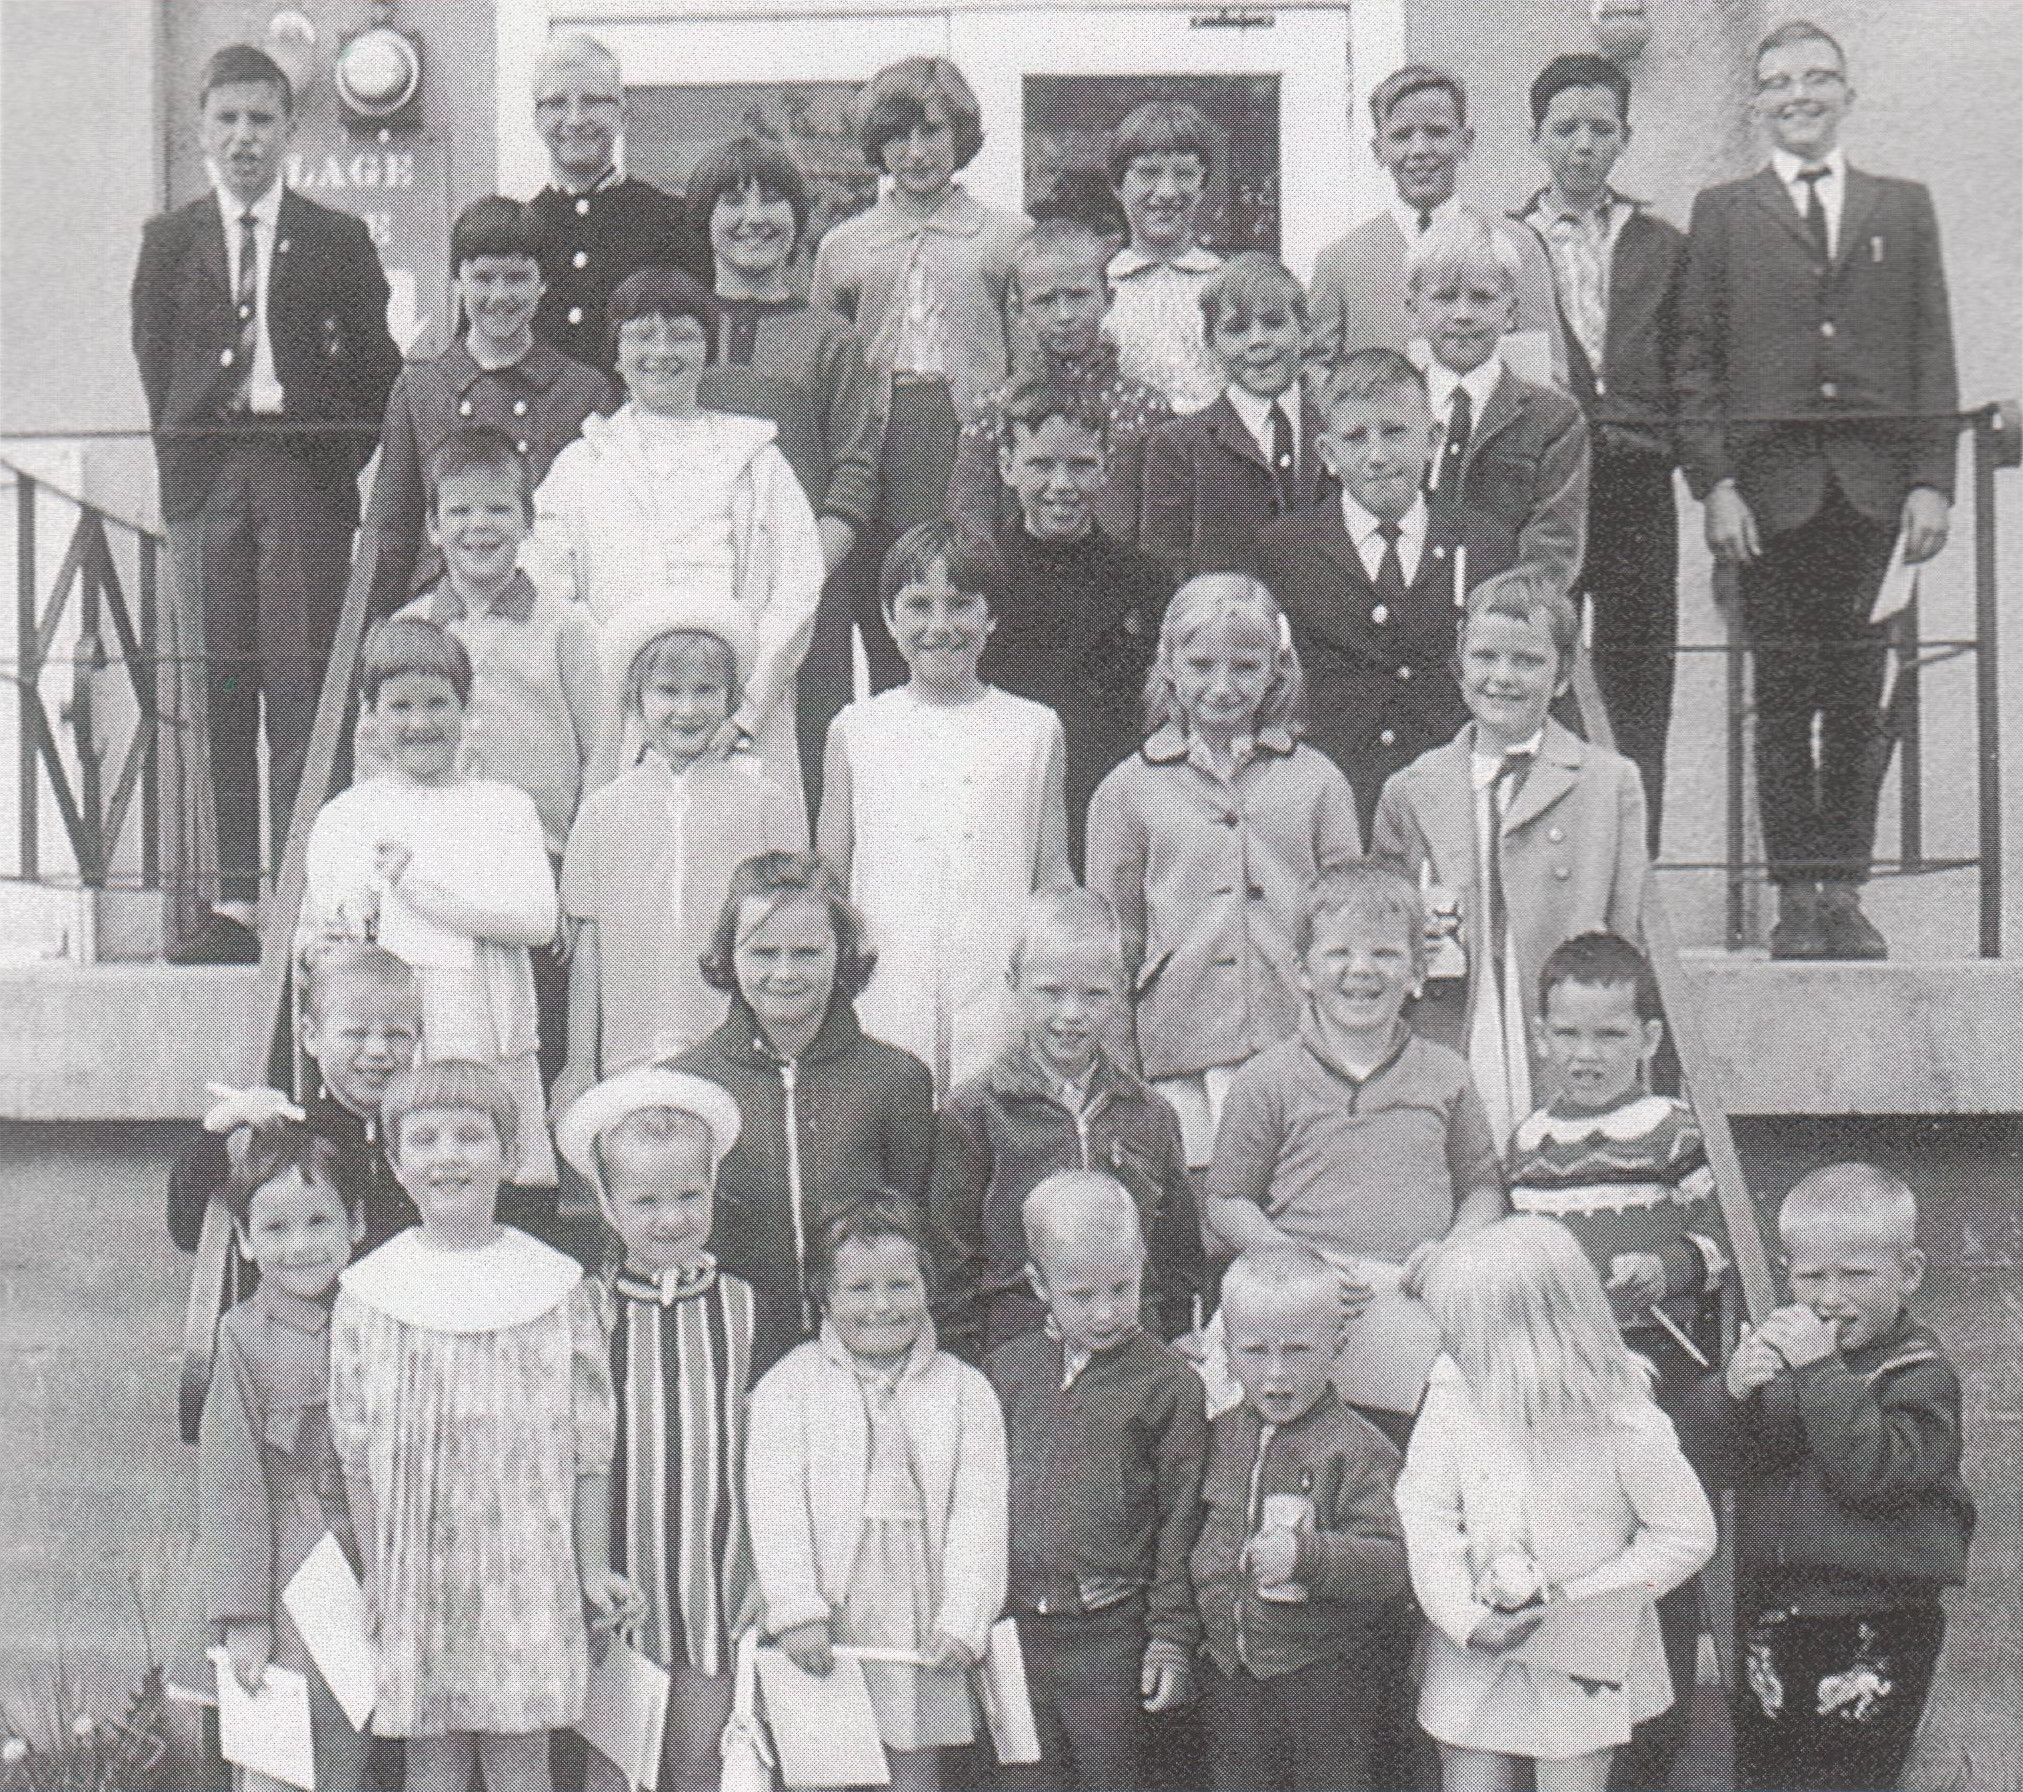 Sunday School in 1967. In those days there was no room at the church for Sunday School, so the children were sent across to the Community Hall.